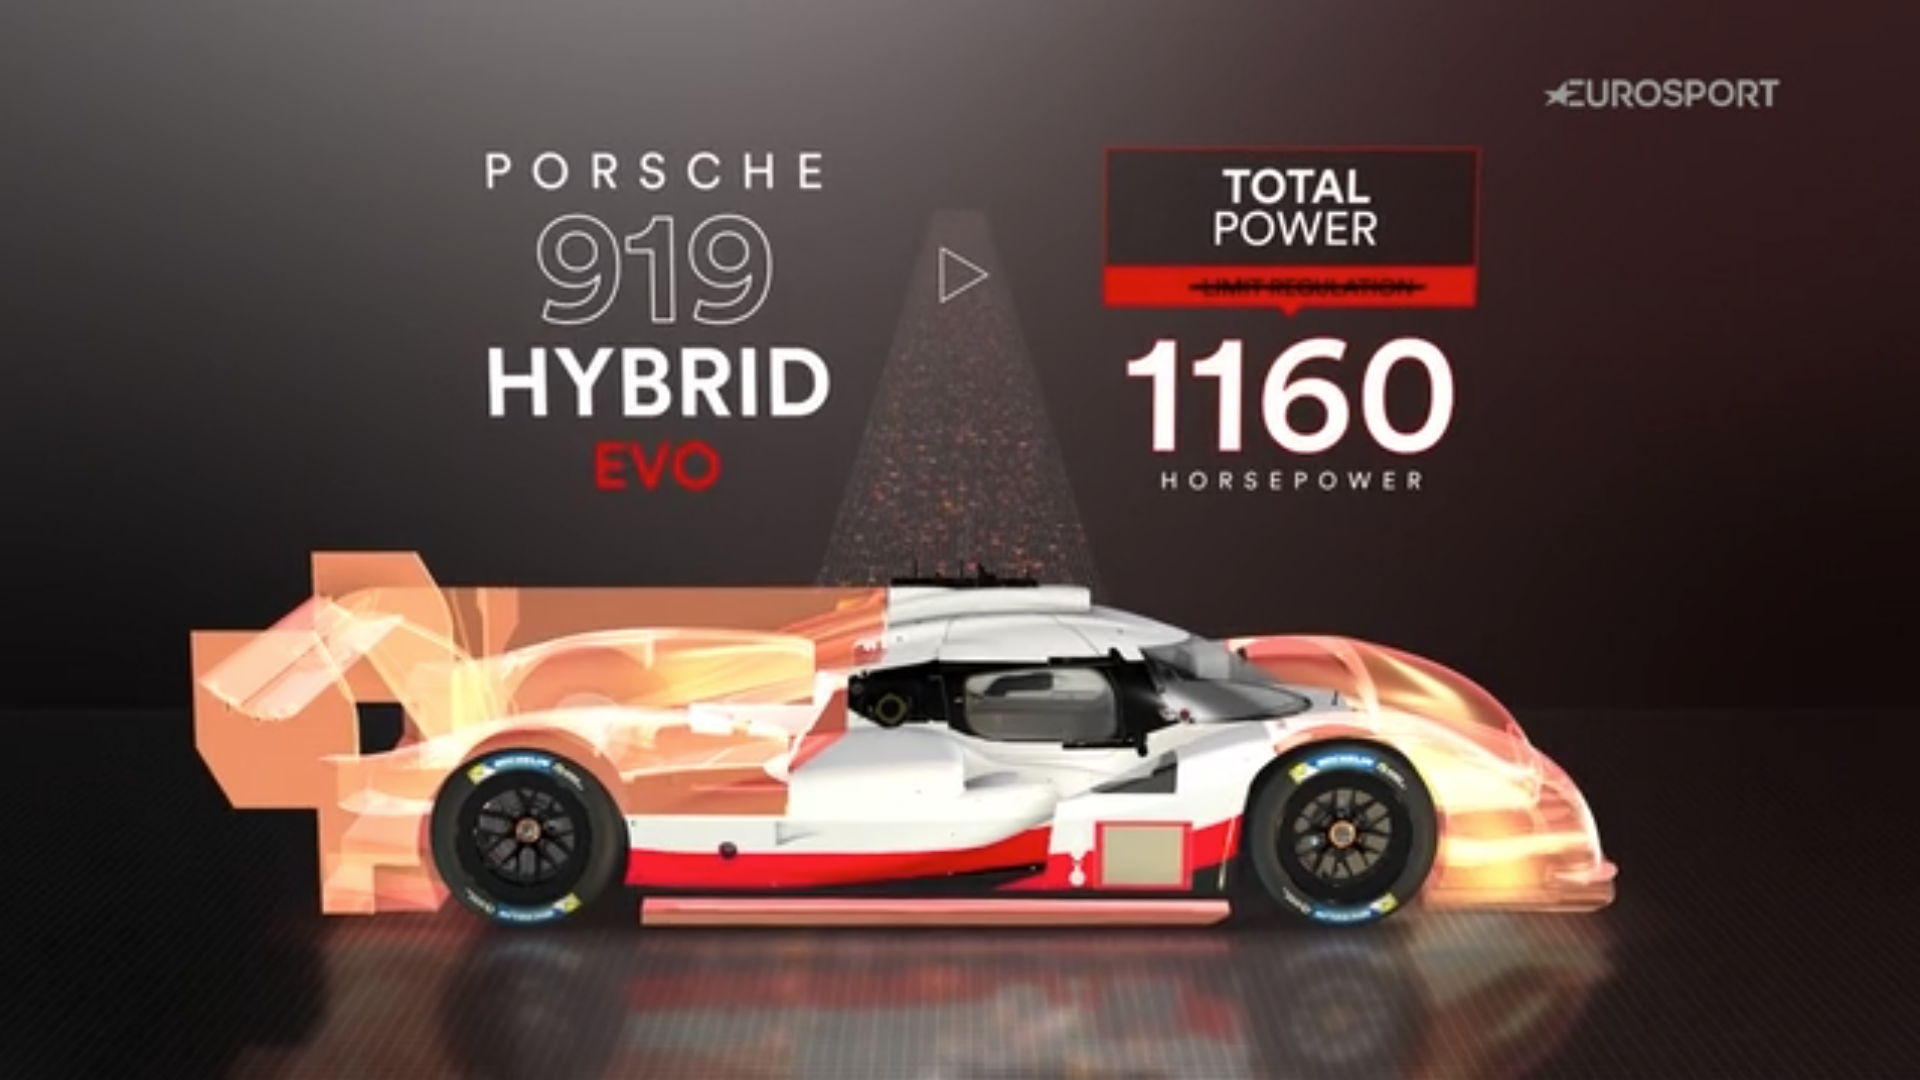 Watch This Beautiful Video Explainer of the World-Beating Porsche 919 Hybrid Evo